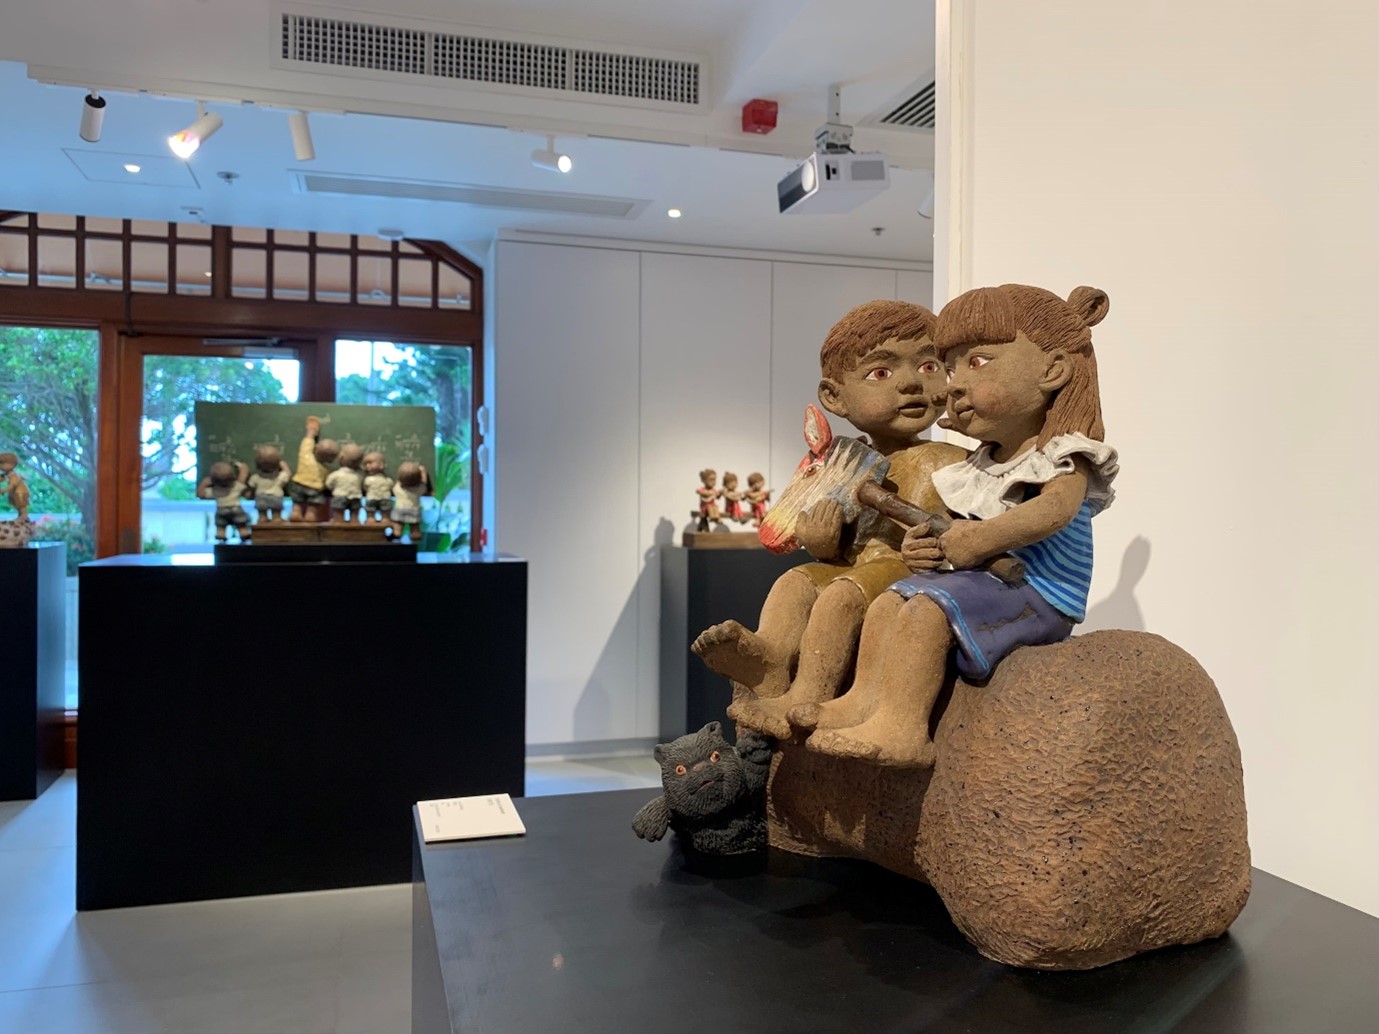 The Innocence of Memory: “Childhood in Ceramic” at Artspace K